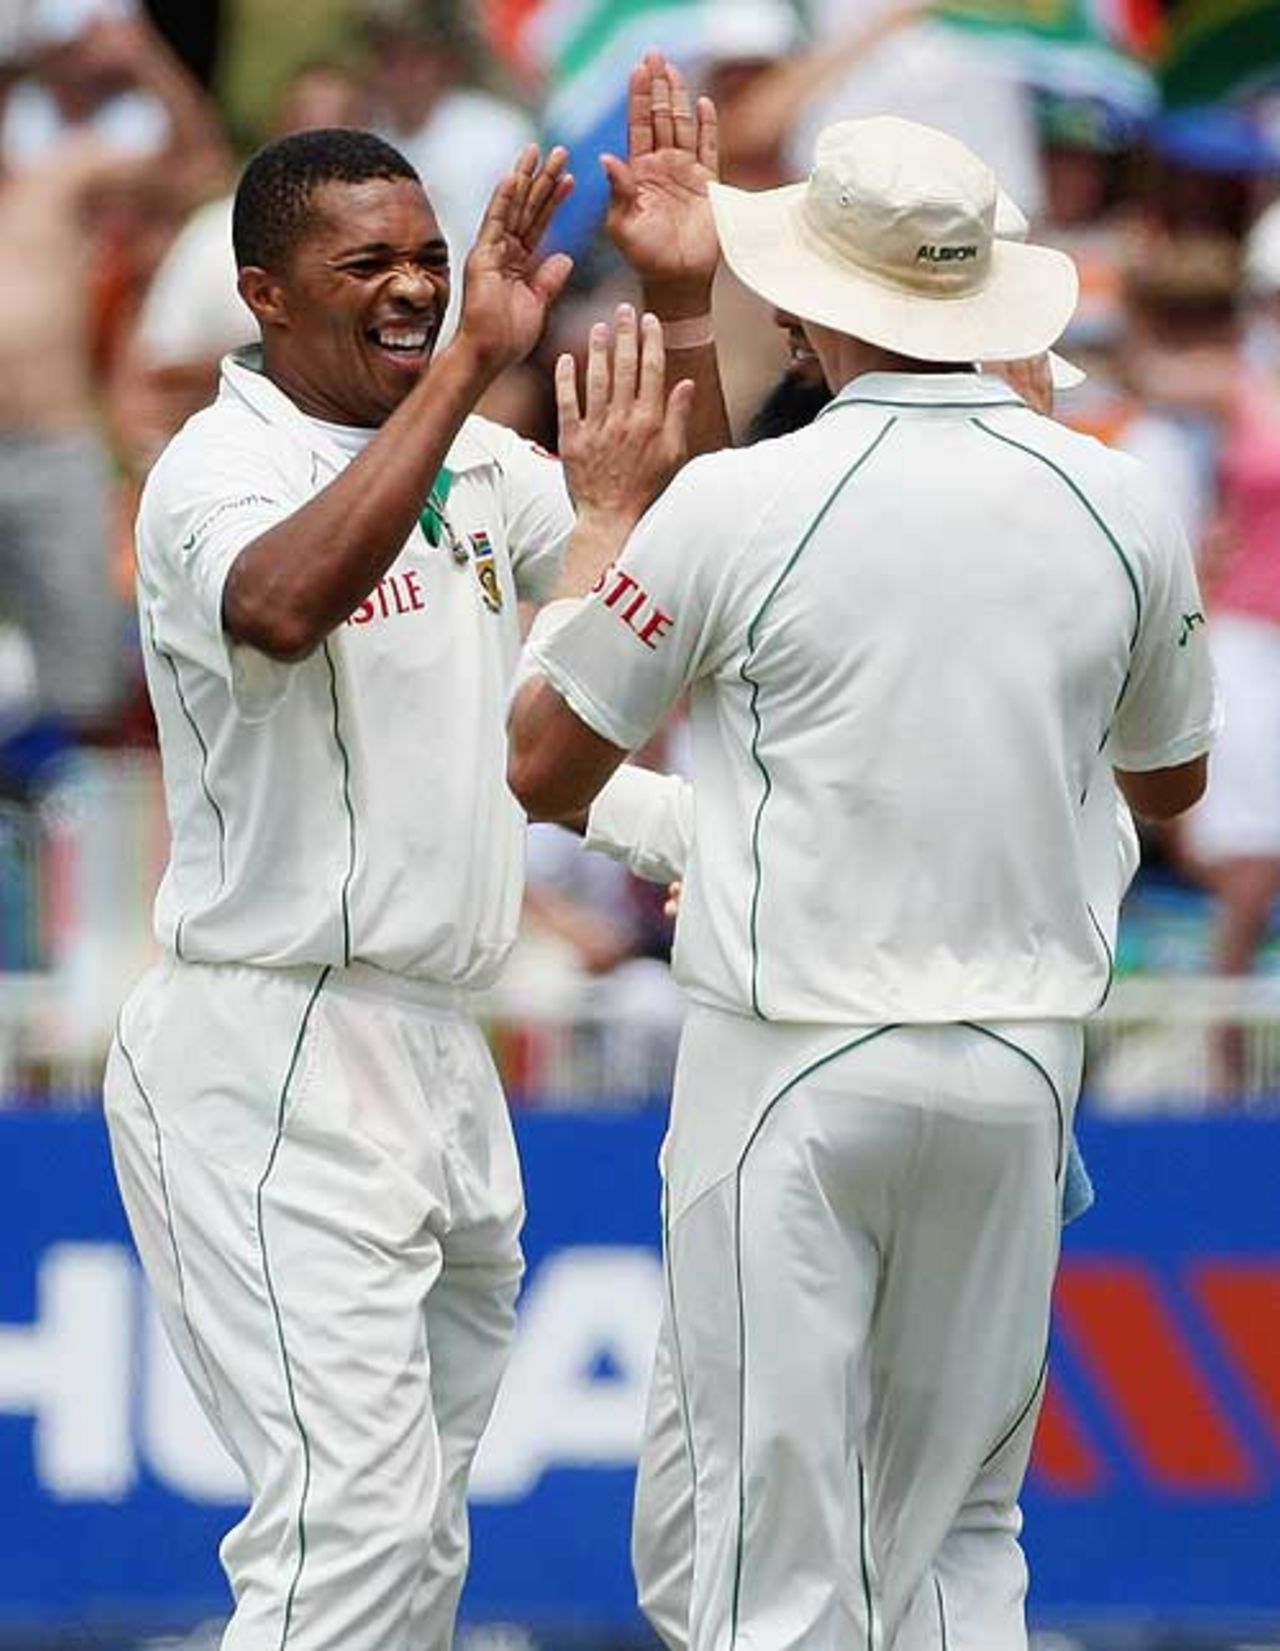 Makhaya Ntini took two wickets in two deliveries before lunch, South Africa v Australia, 2nd Test, Durban, 2nd day, March 7, 2009